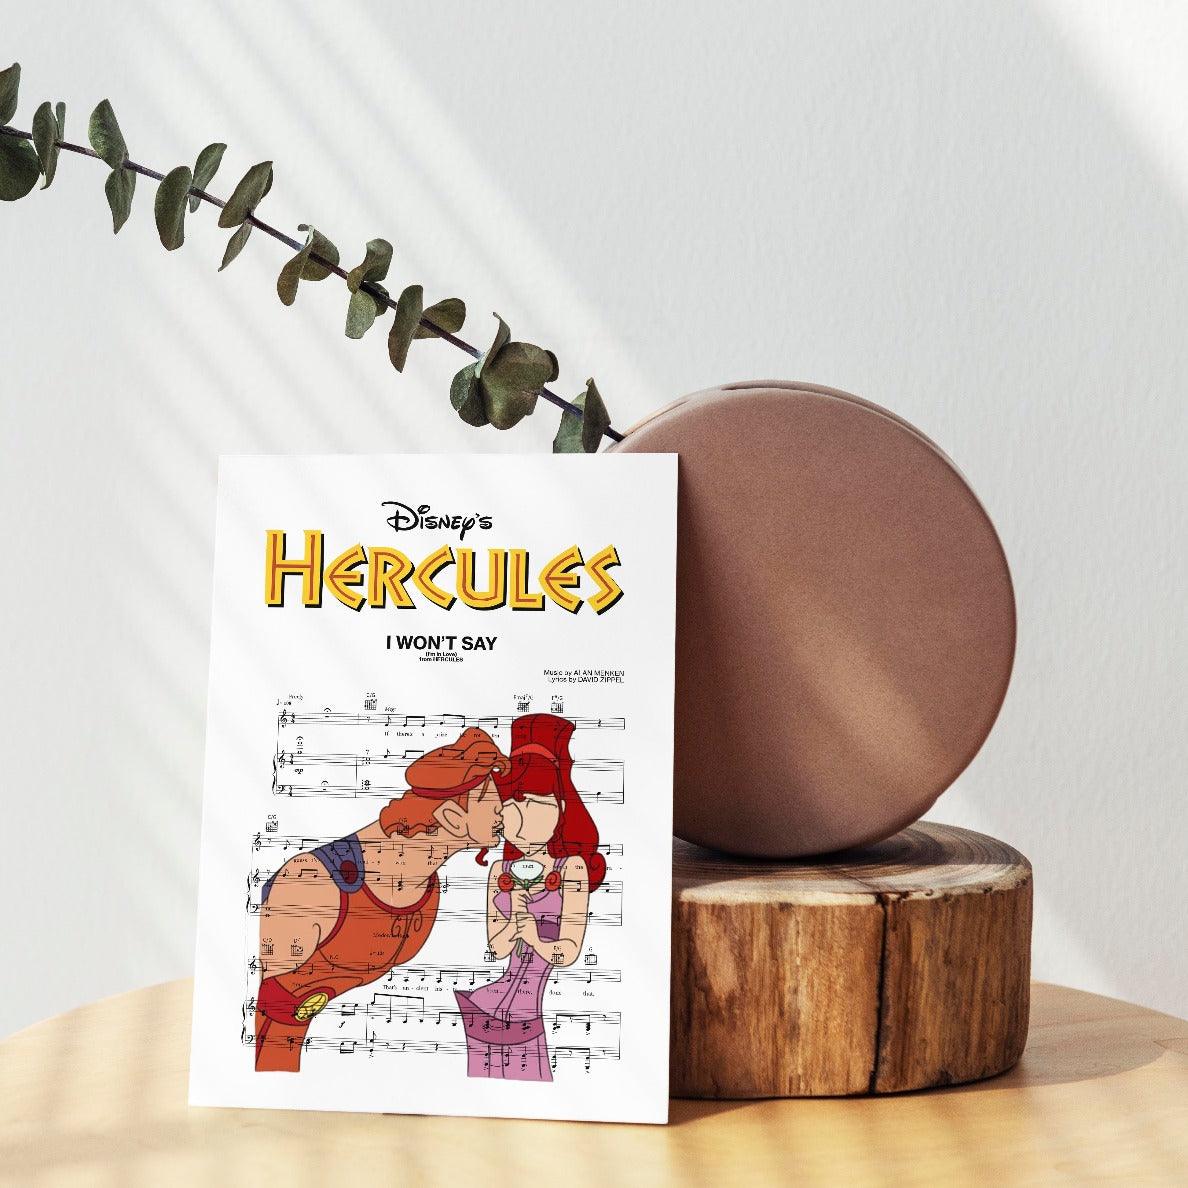 This print is the perfect addition to your home if you're a fan of Disney and/or Hercules. The print is inspired by the Disney movie Hercules and is a great addition to any Disney fan's home decor. The print is available in a range of sizes so that you can find the perfect fit for your home.